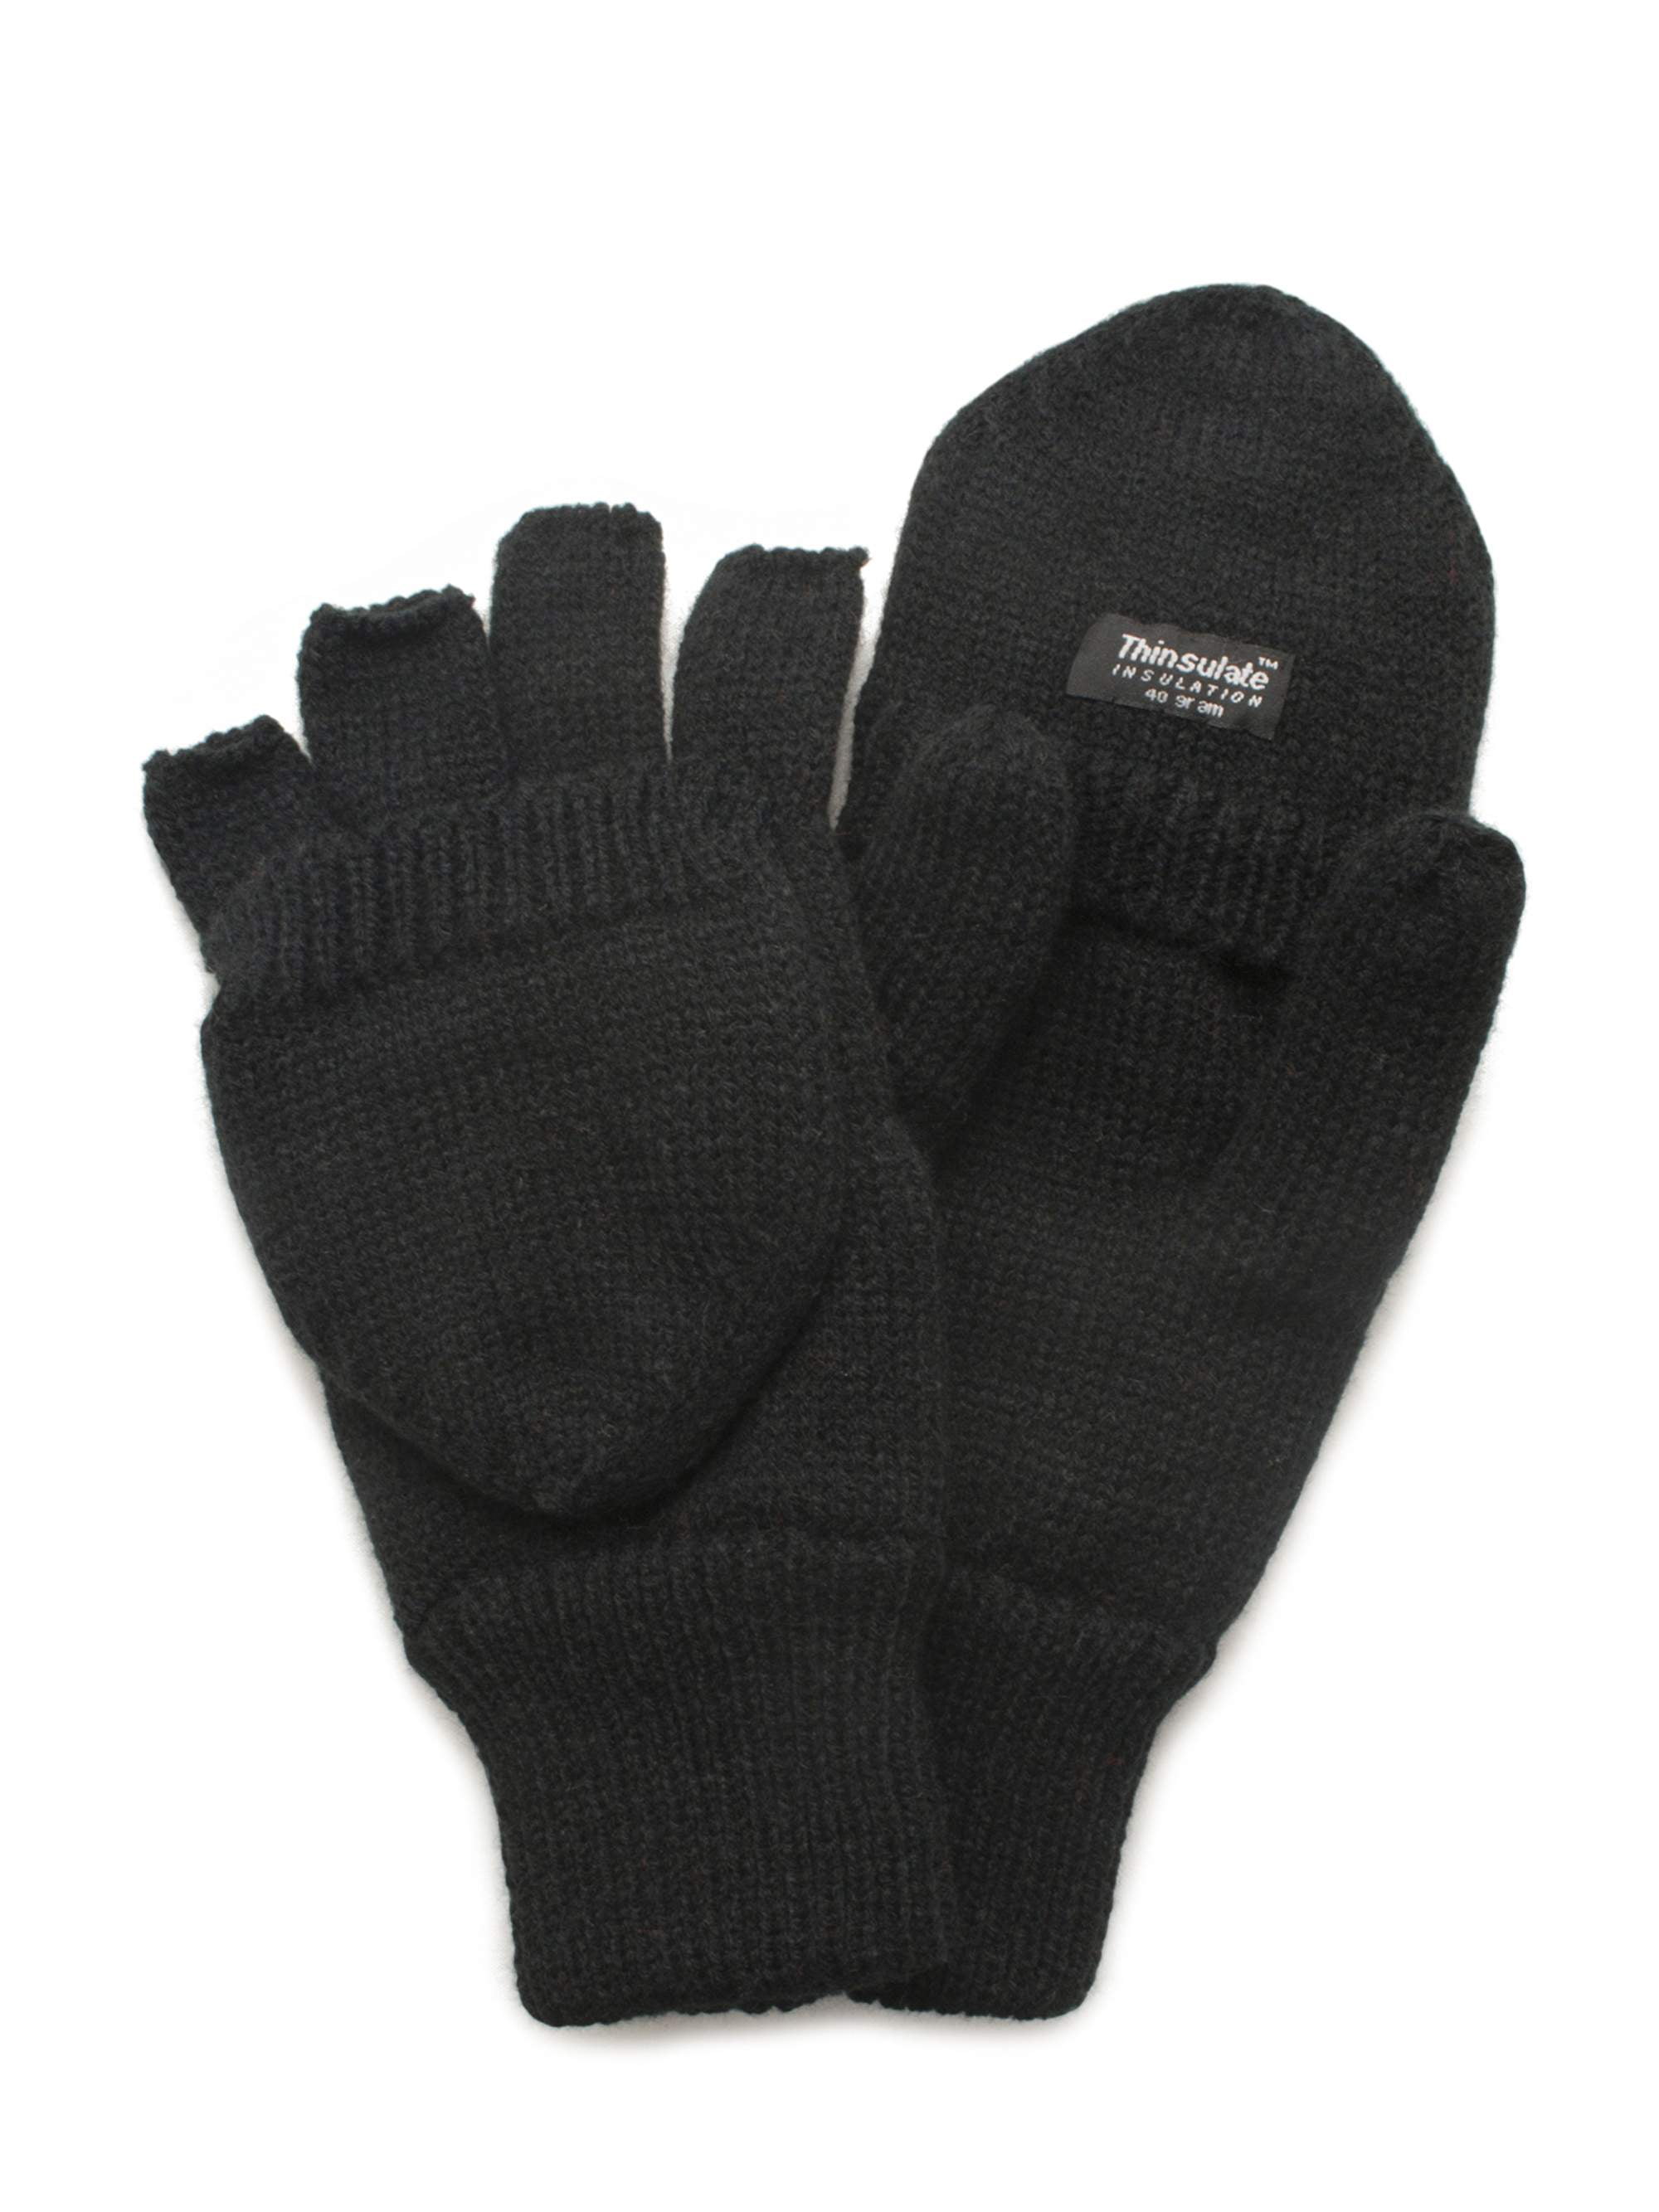 Color : Black bxvhry Mens Convertible Mittens Thinsulate Insulation Fleece Lined Warm Knit Half Fingerless Gloves with Mitten Cover